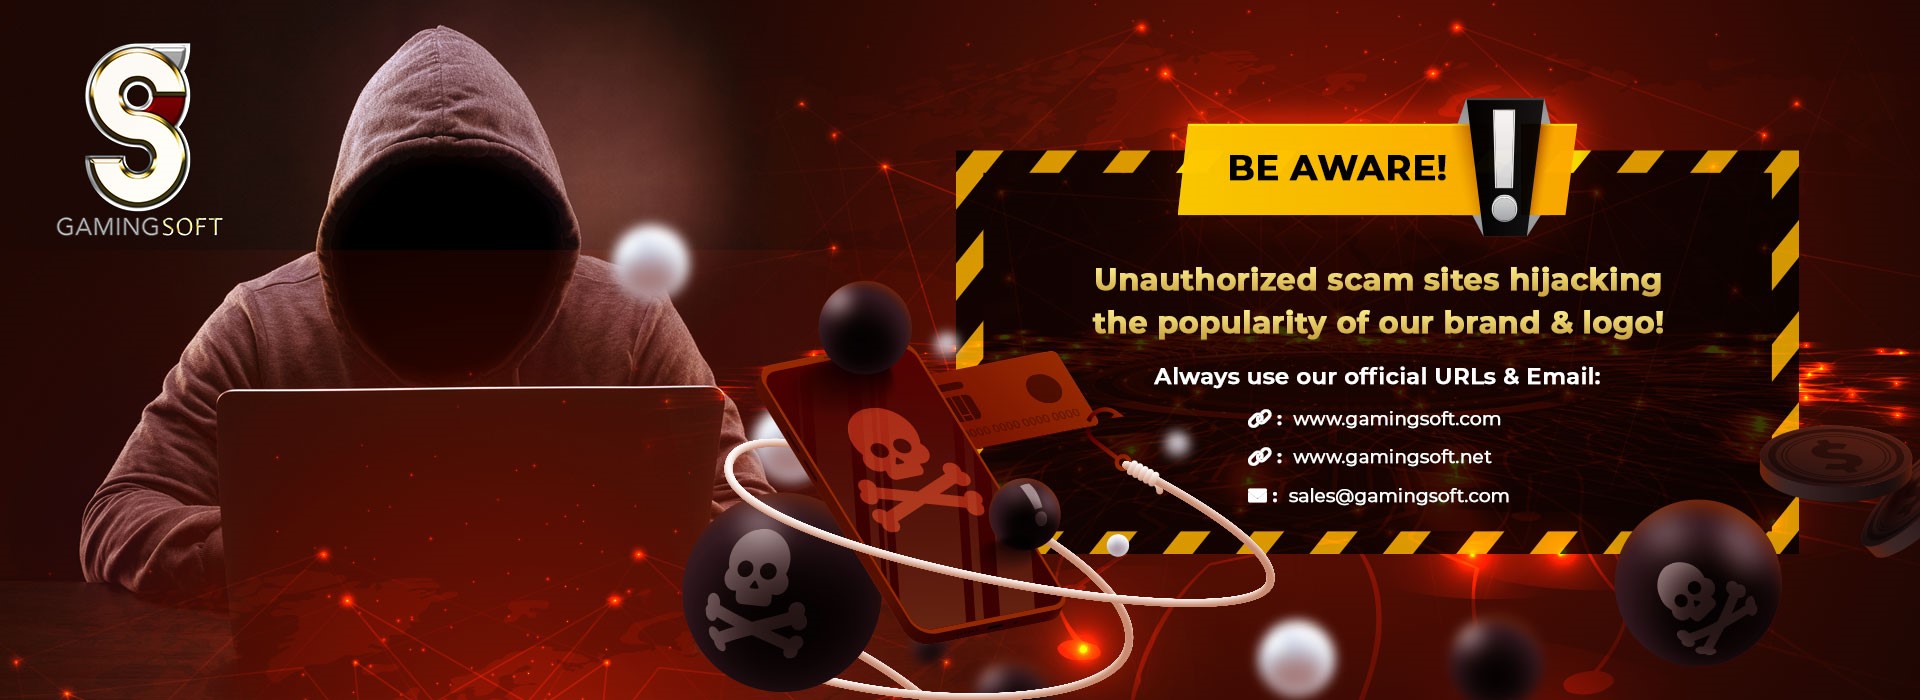 Be Aware! Unauthorized scam sites hijacking the popularity of our brand and logo Web Banner - GamingSoft